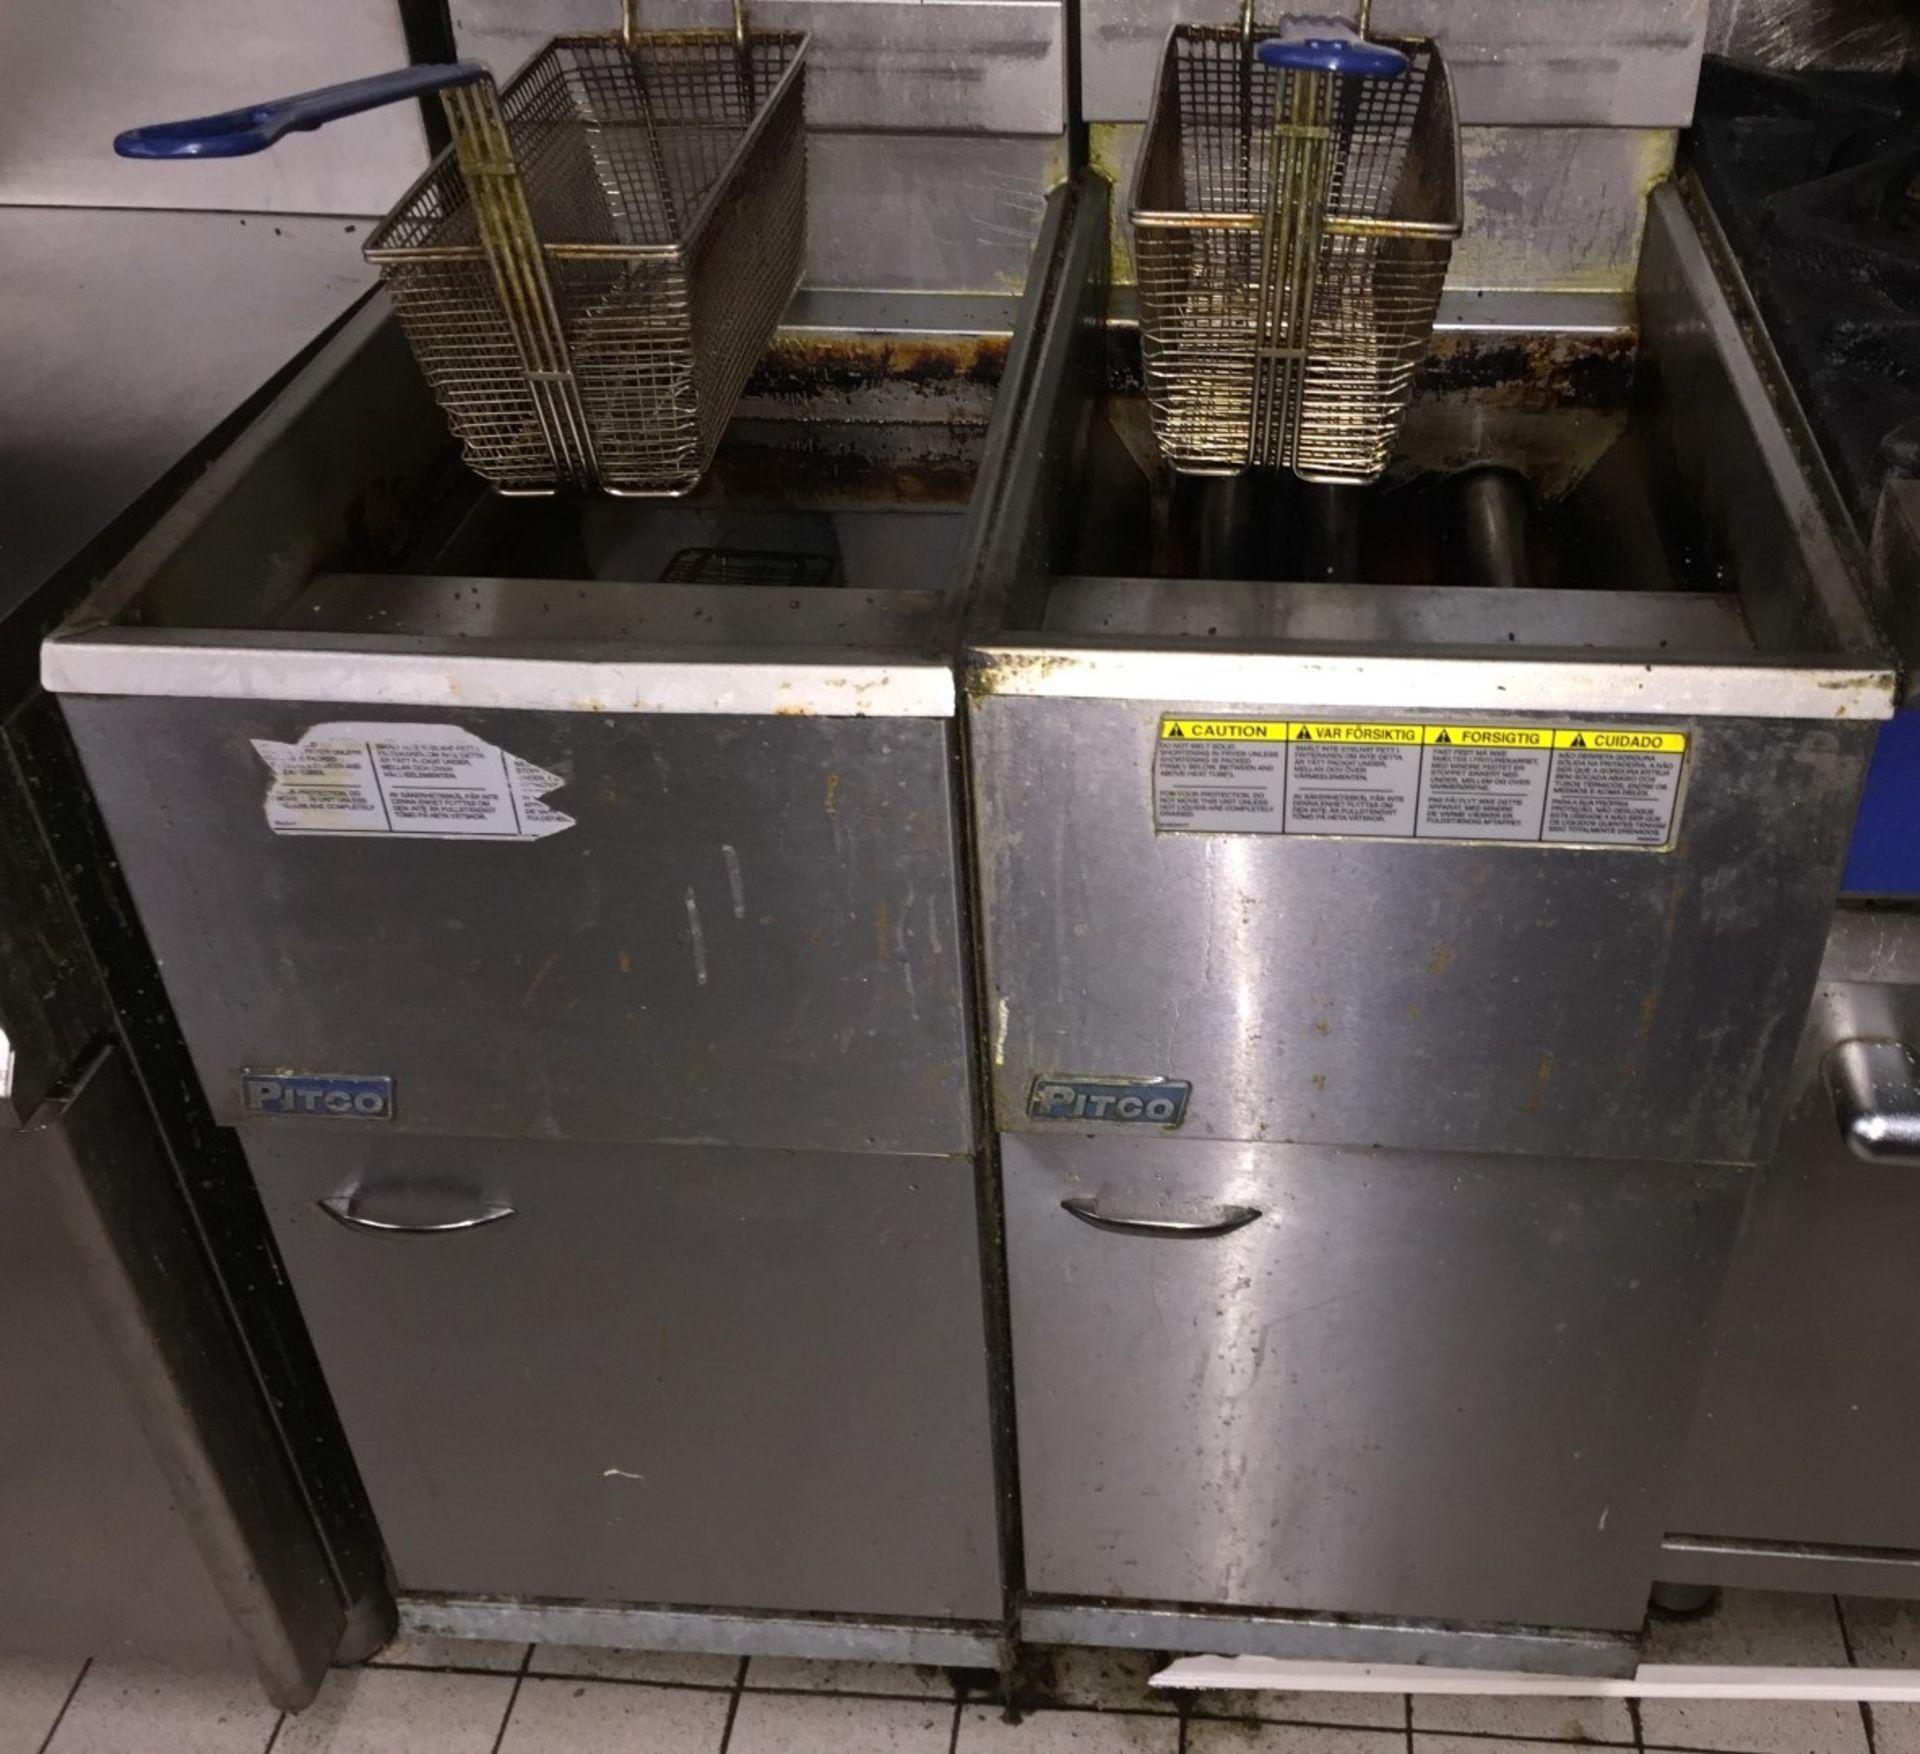 2 x Pifco 35C+ Gas Fryers With Frying Baskets - Stainless Steel - CL188 - H79 x W39 cms - Ref